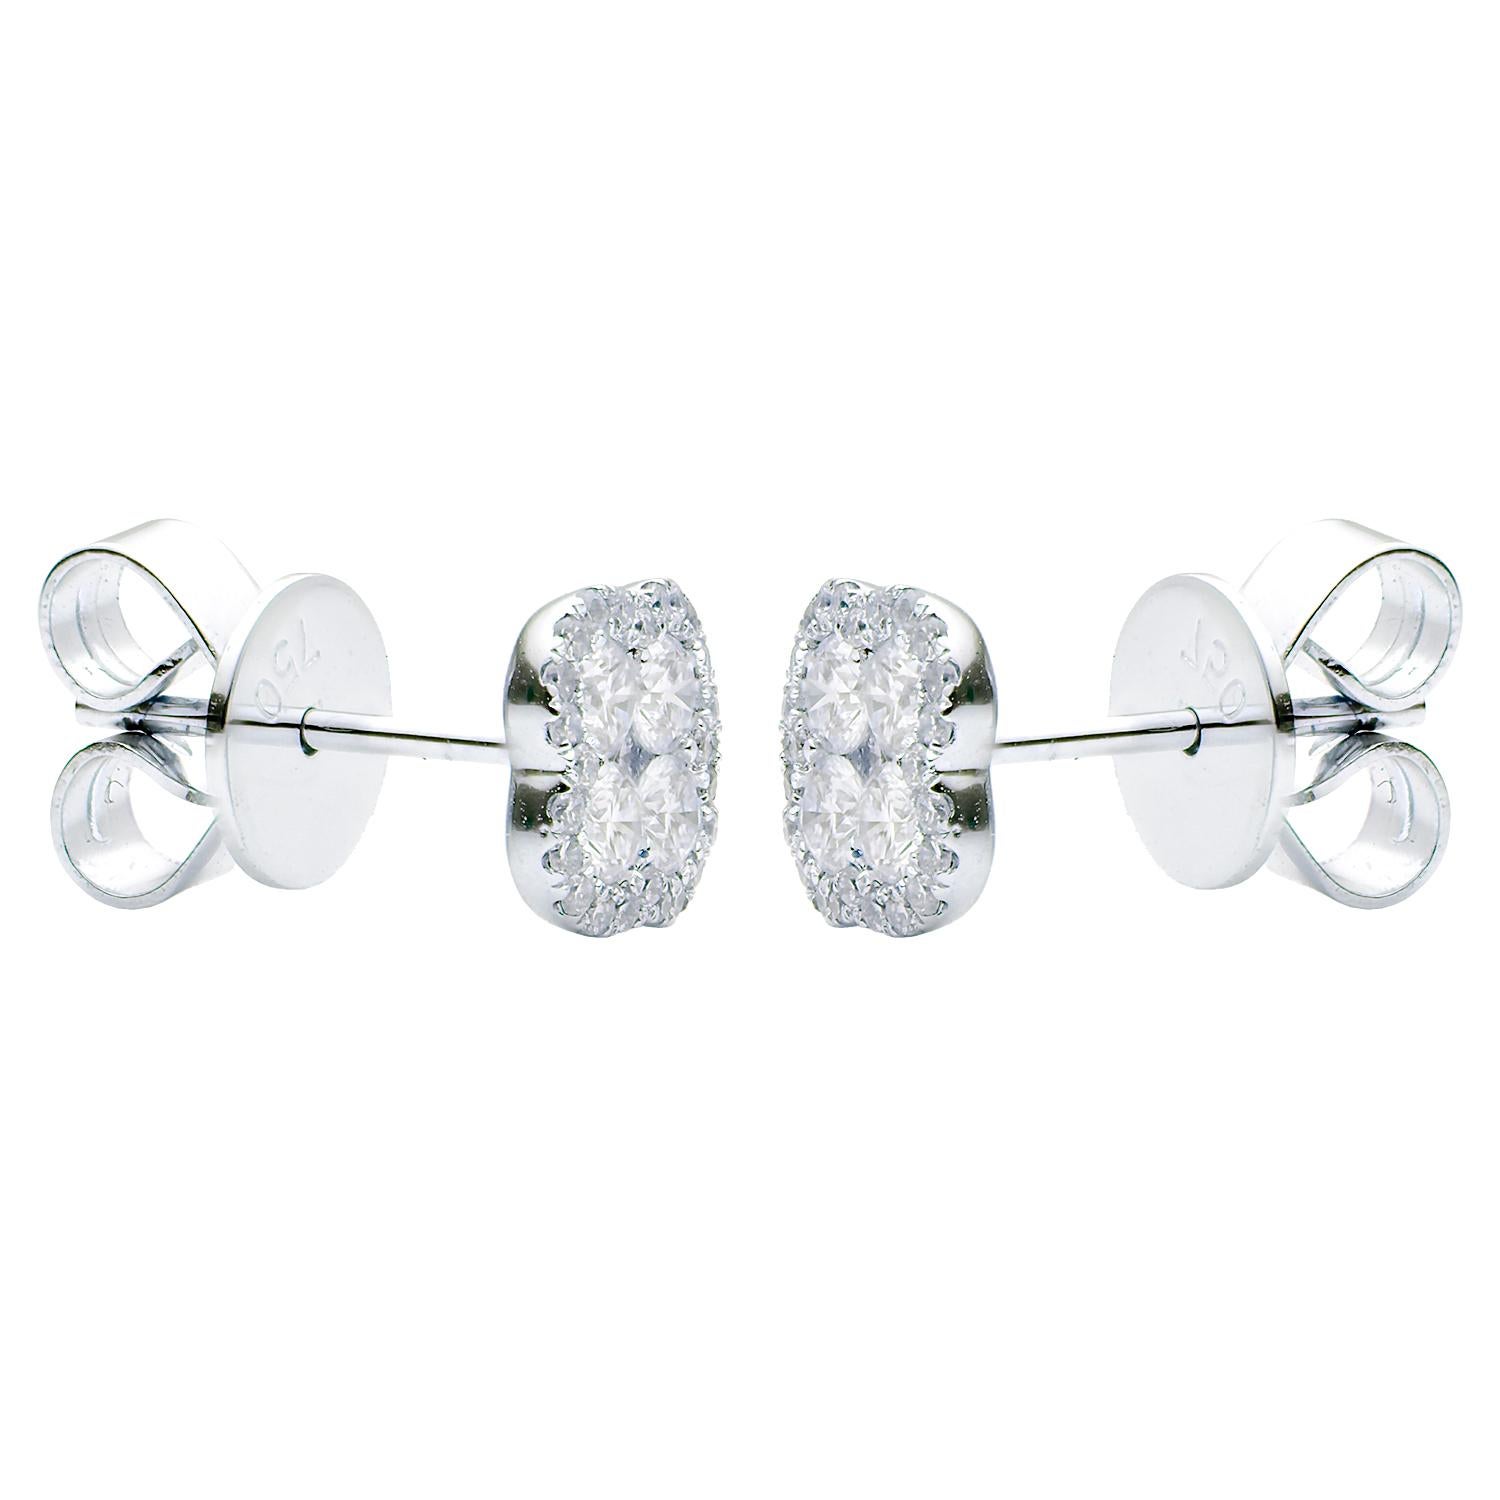 Contemporary 14 Karat White Gold Diamond Cluster Stud Earrings with Halo For Sale